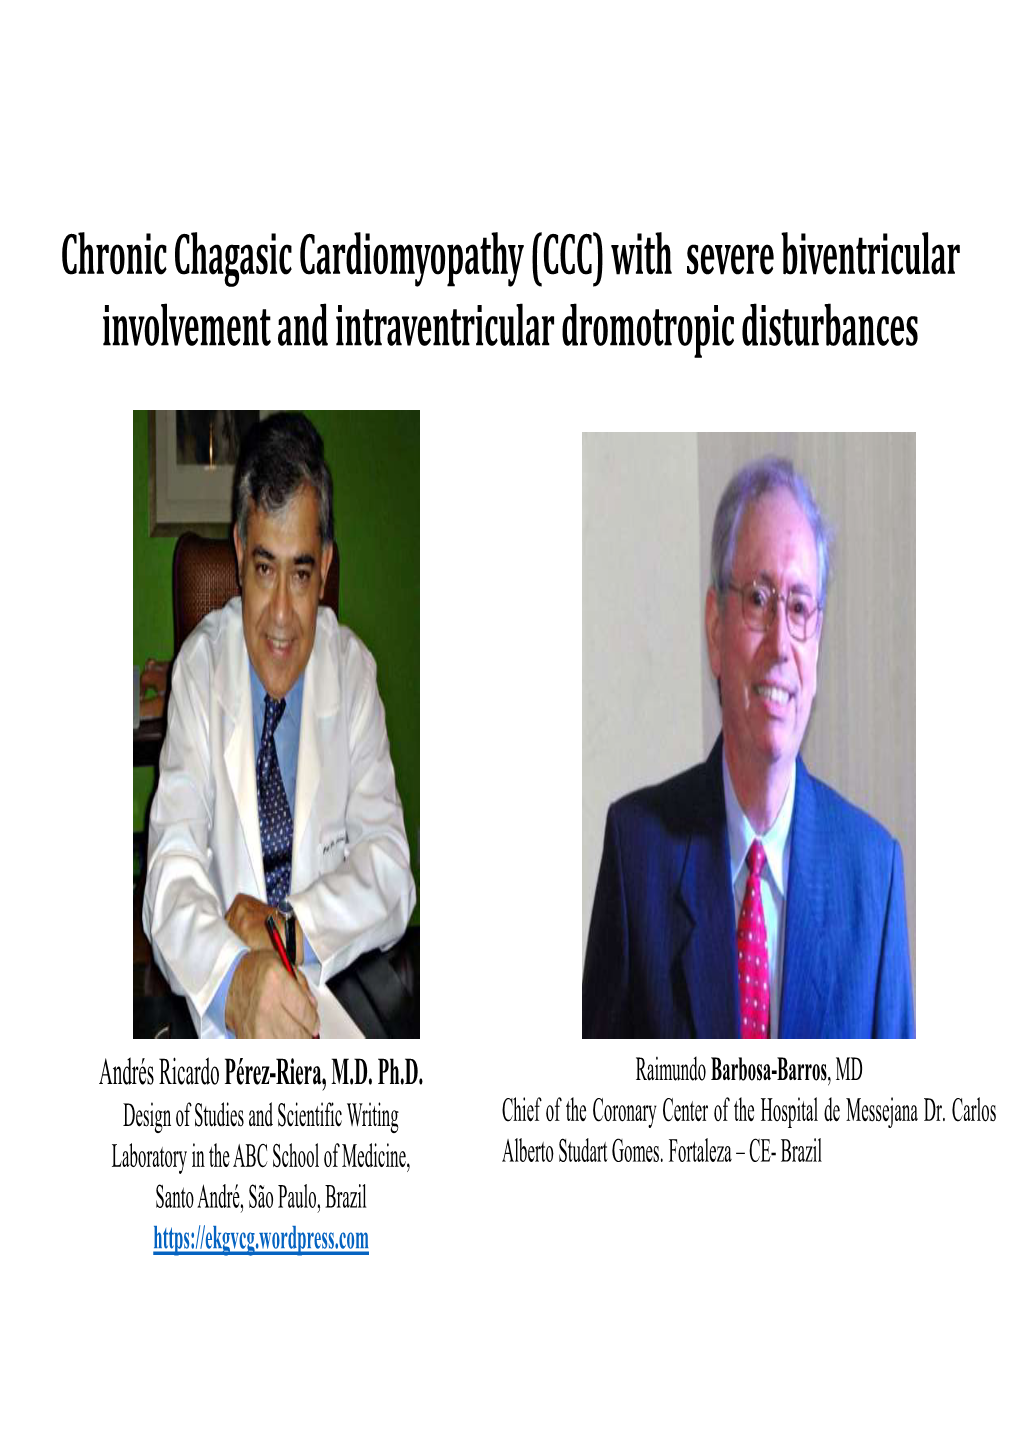 Chronic Chagasic Cardiomyopathy (CCC) with Severe Biventricular Involvement and Intraventricular Dromotropic Disturbances